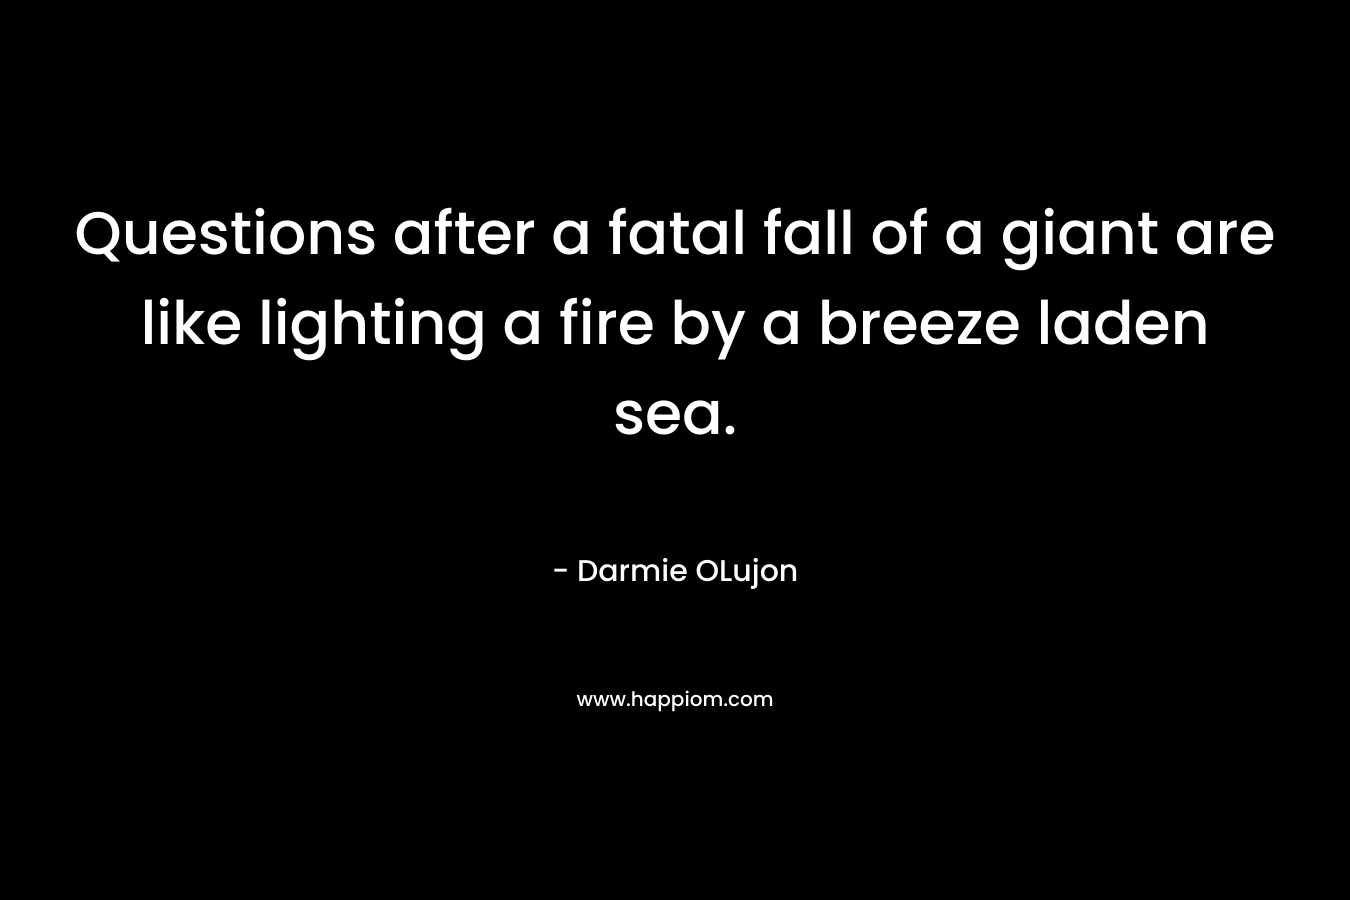 Questions after a fatal fall of a giant are like lighting a fire by a breeze laden sea. – Darmie OLujon